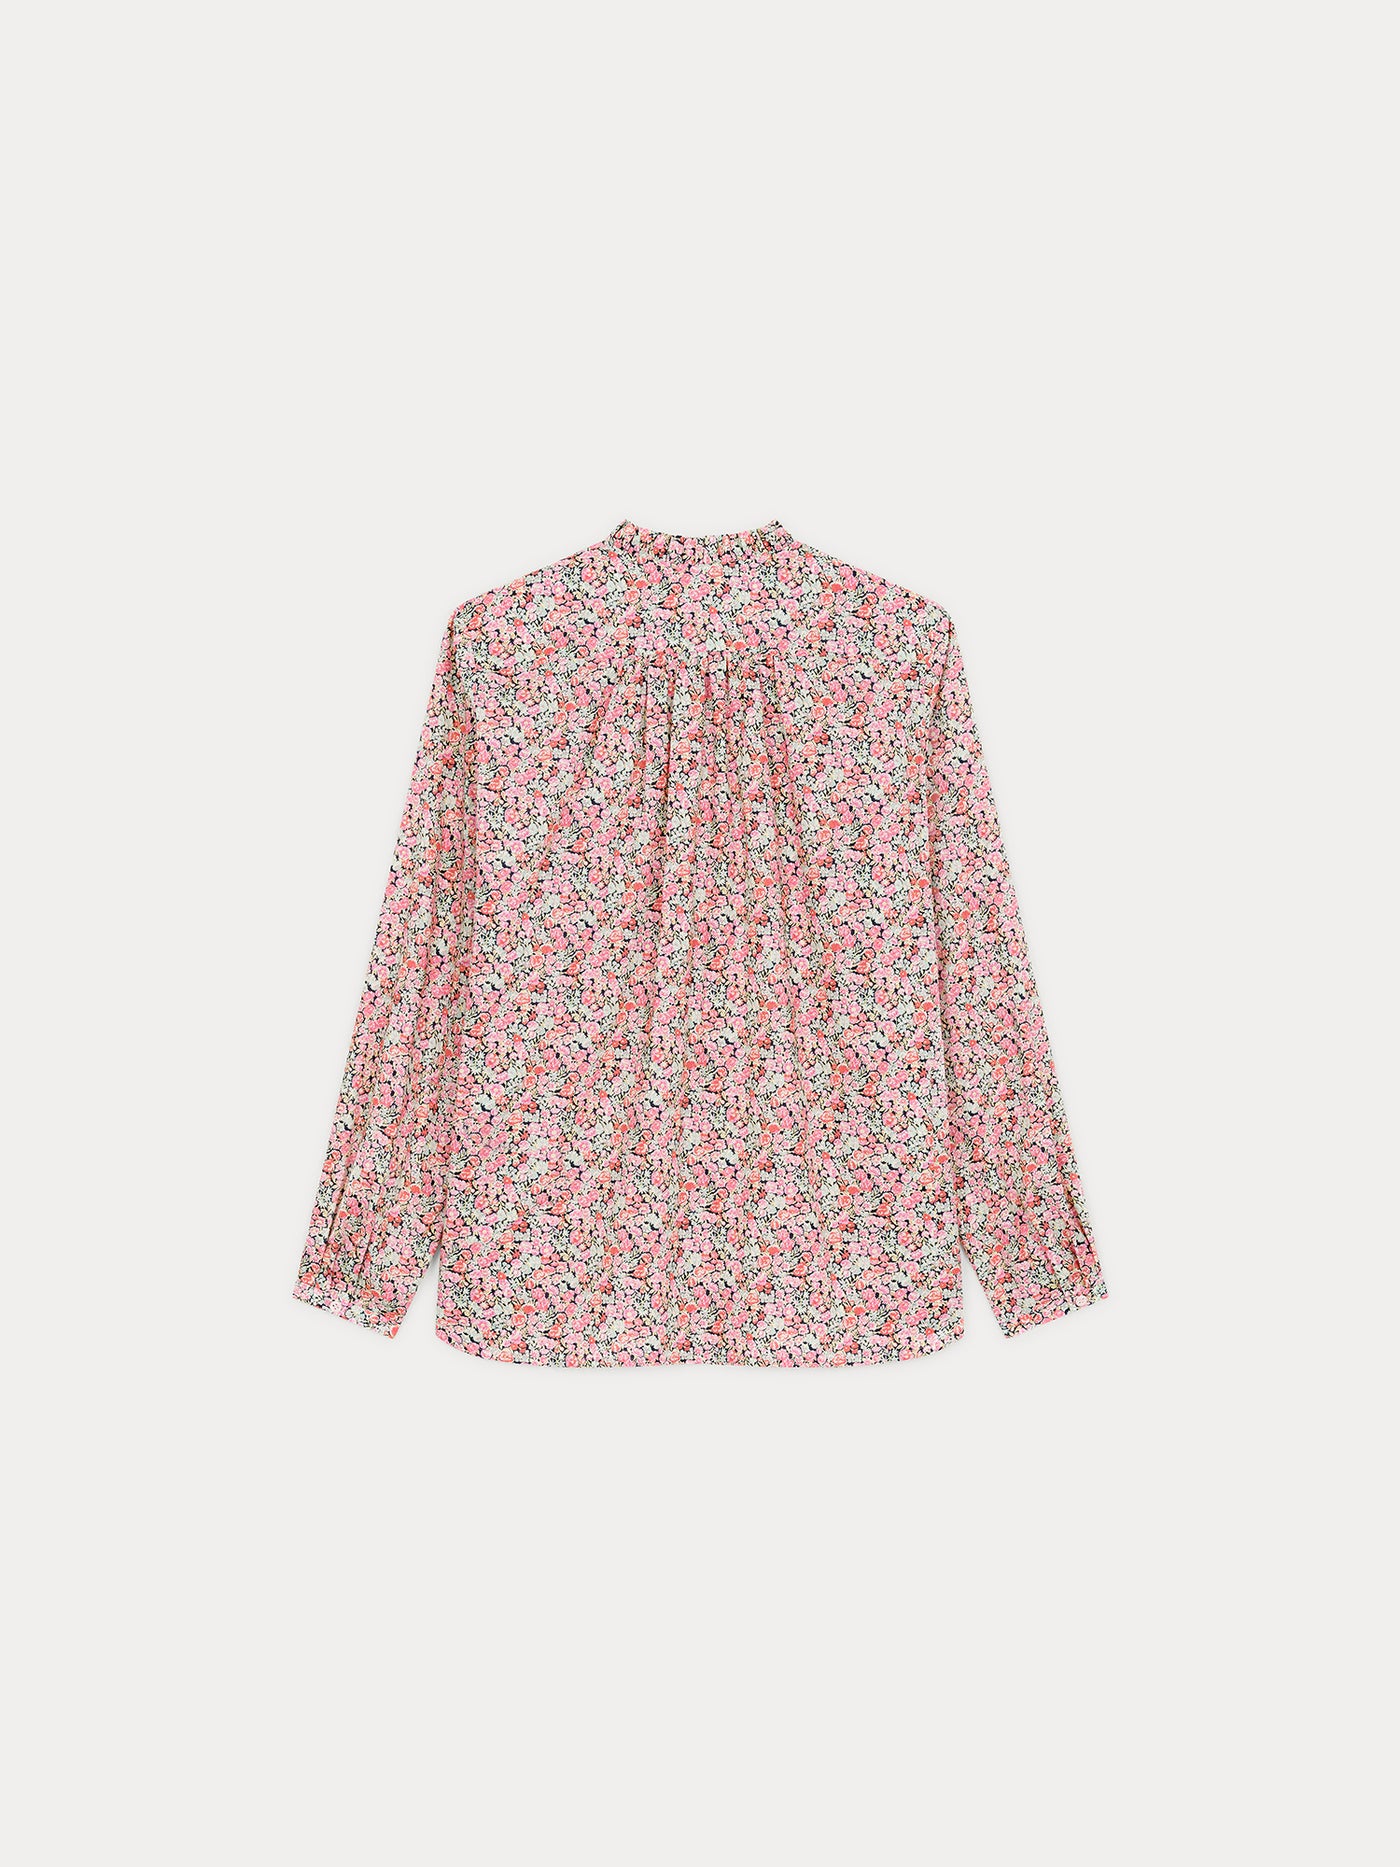 Shirt in exclusive Liberty fabric in printed cotton poplin